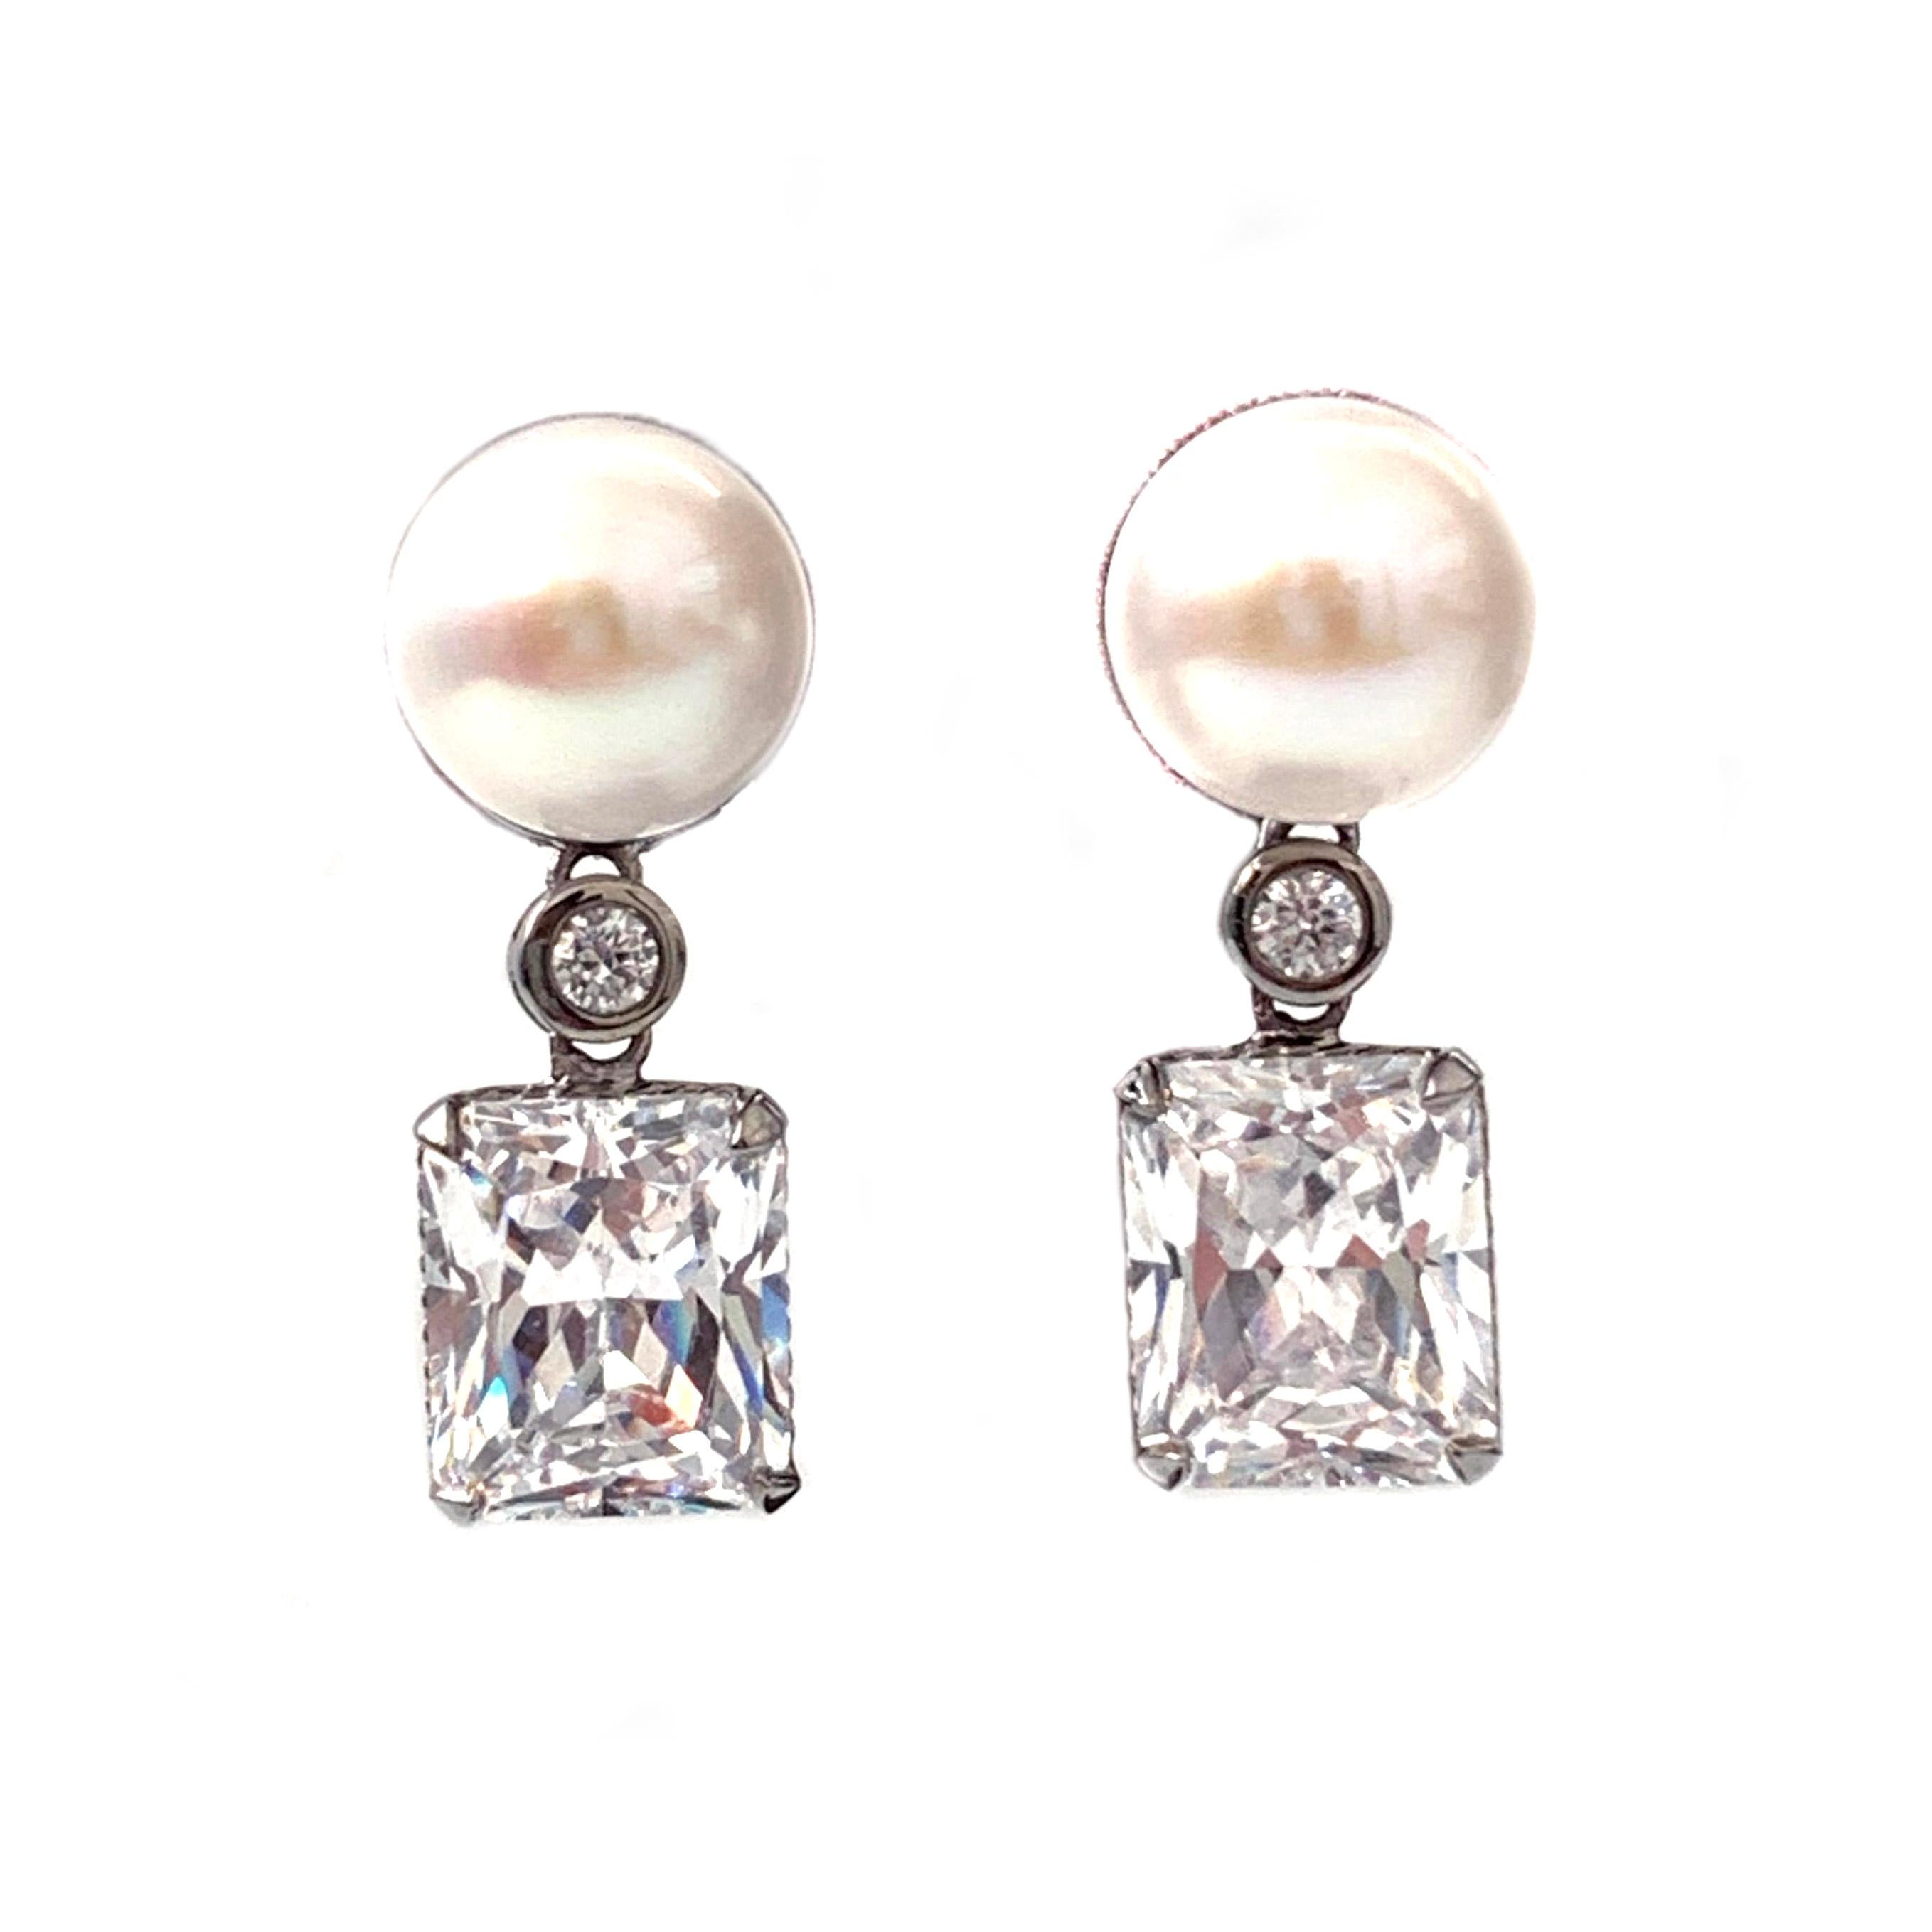 11mm Cultured Pearl and 4ct Simulated Diamond Drop Earrings

Stunning runway style earrings feature 11mm white cultured pearl and octagon simulated diamond (4 carat size), handcrafted in black rhodium plated sterling silver. The earrings give a lot